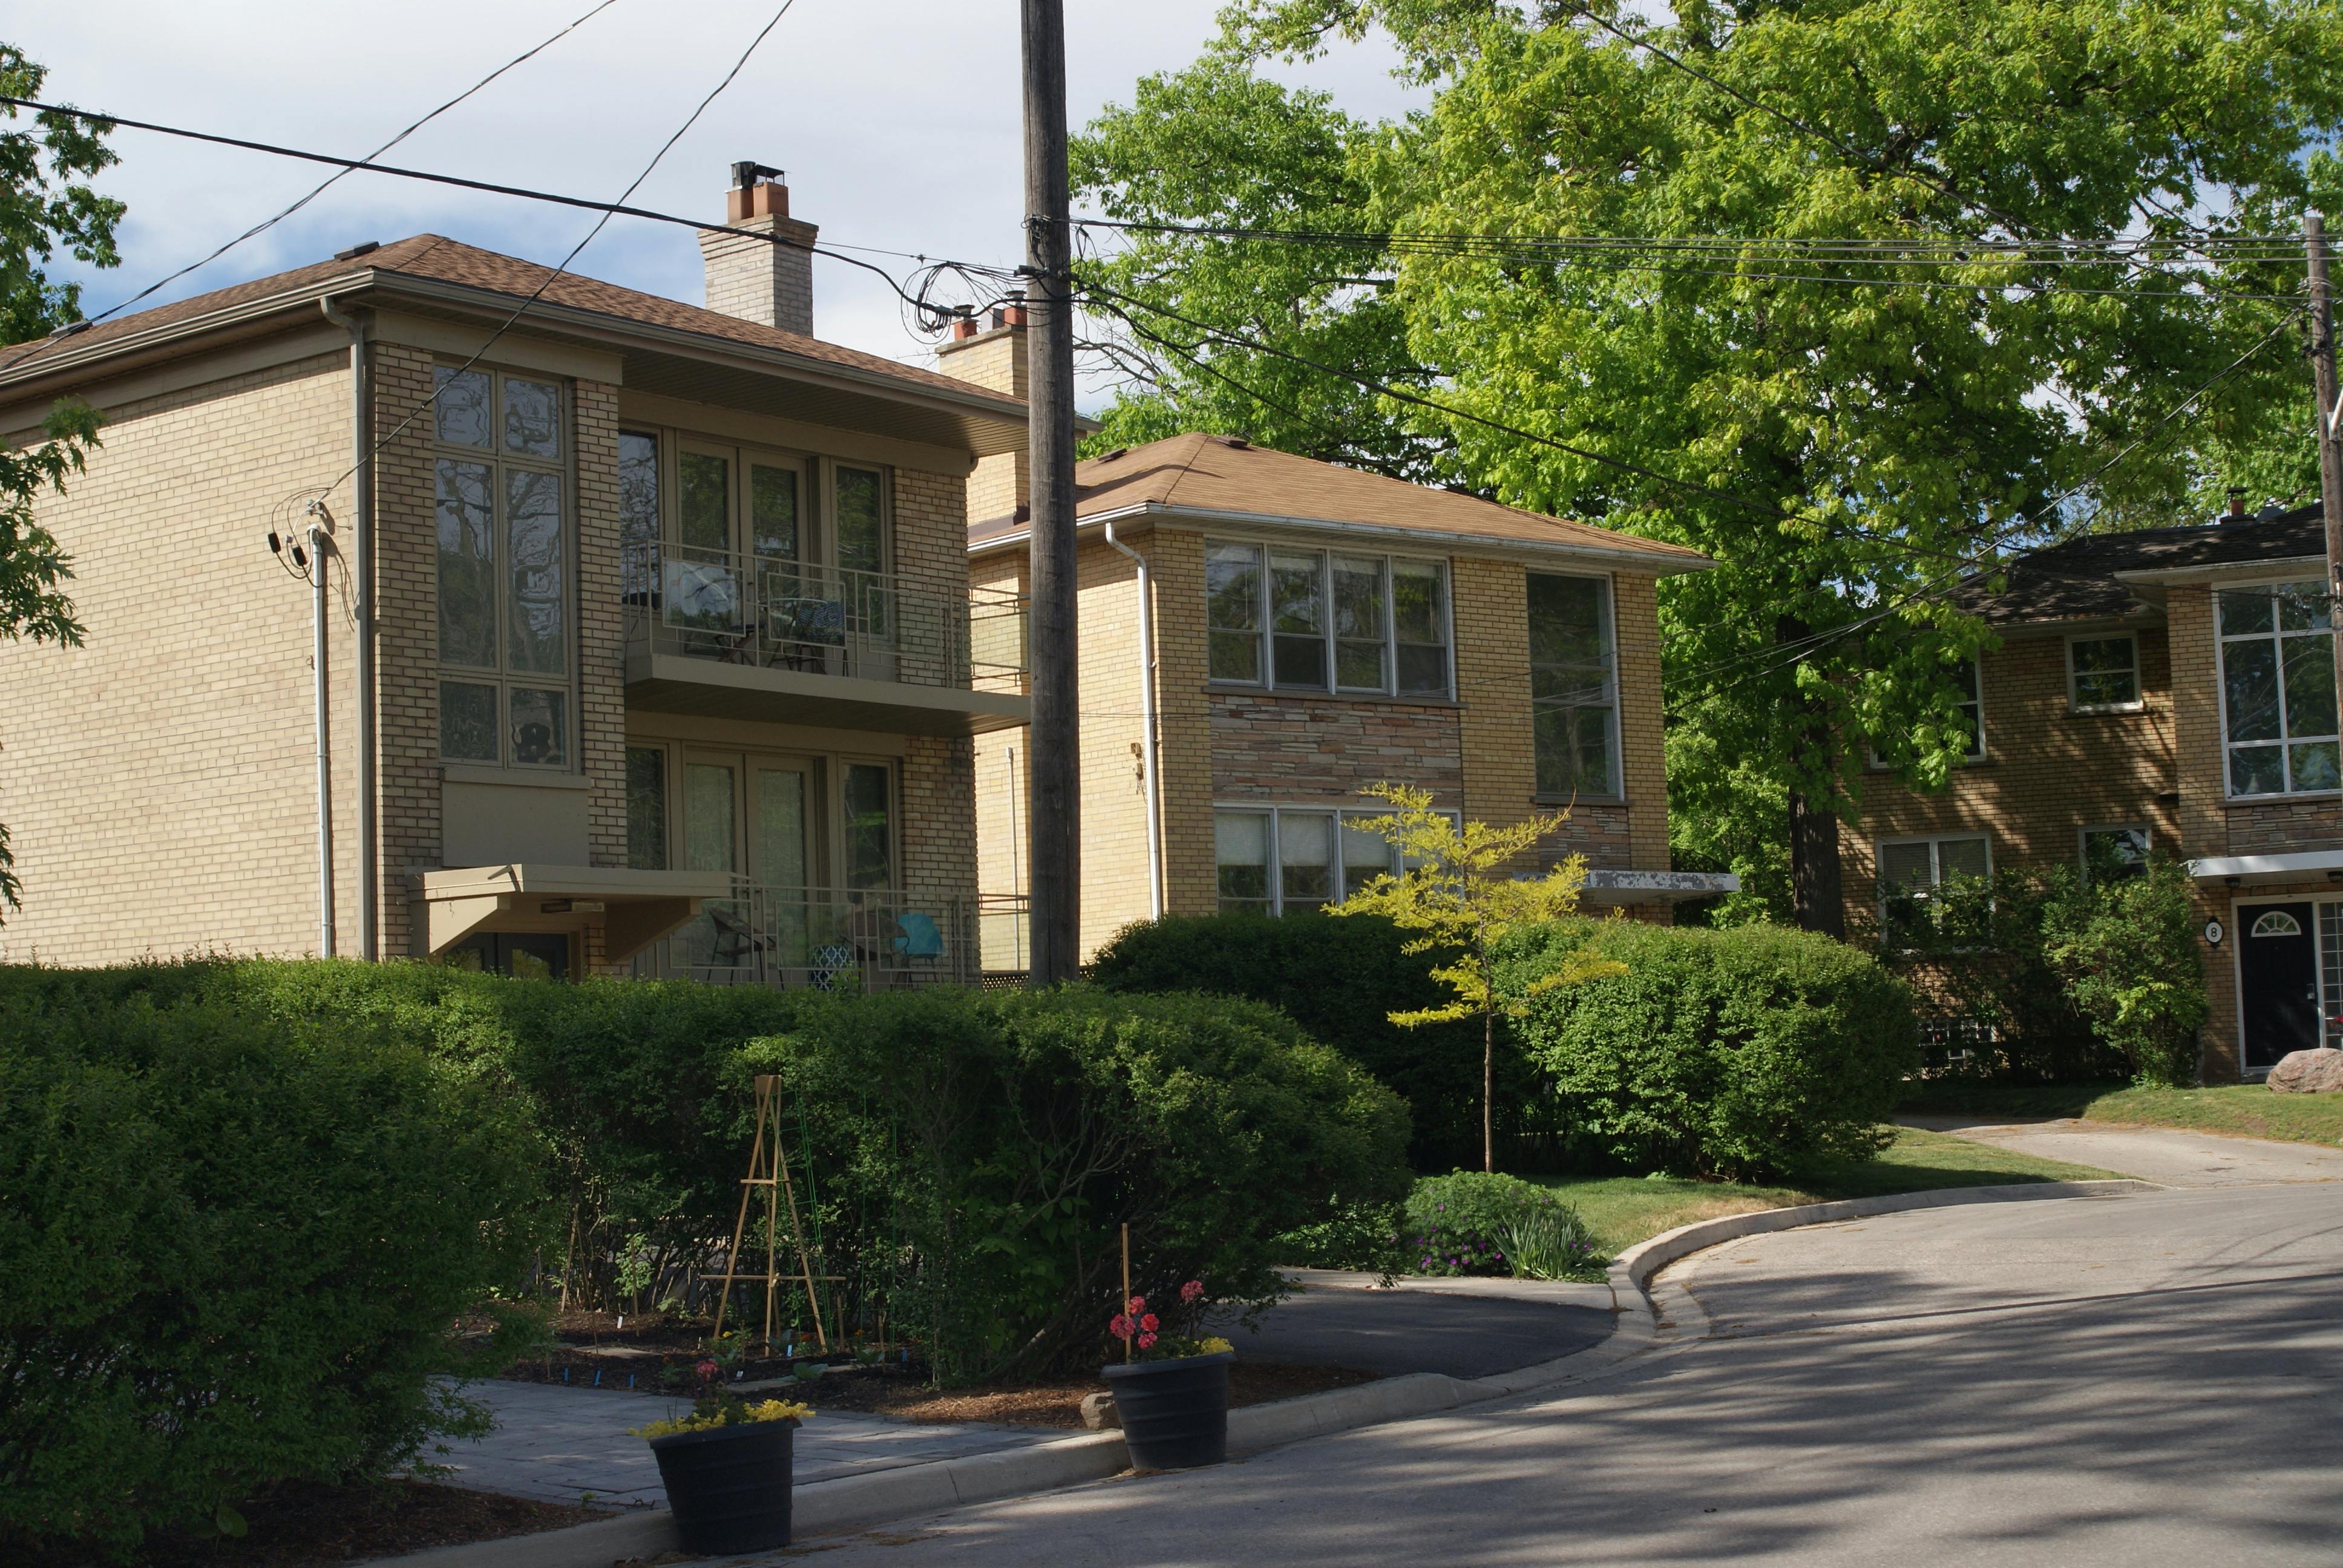 Example of plexes in Lakeview.JPG